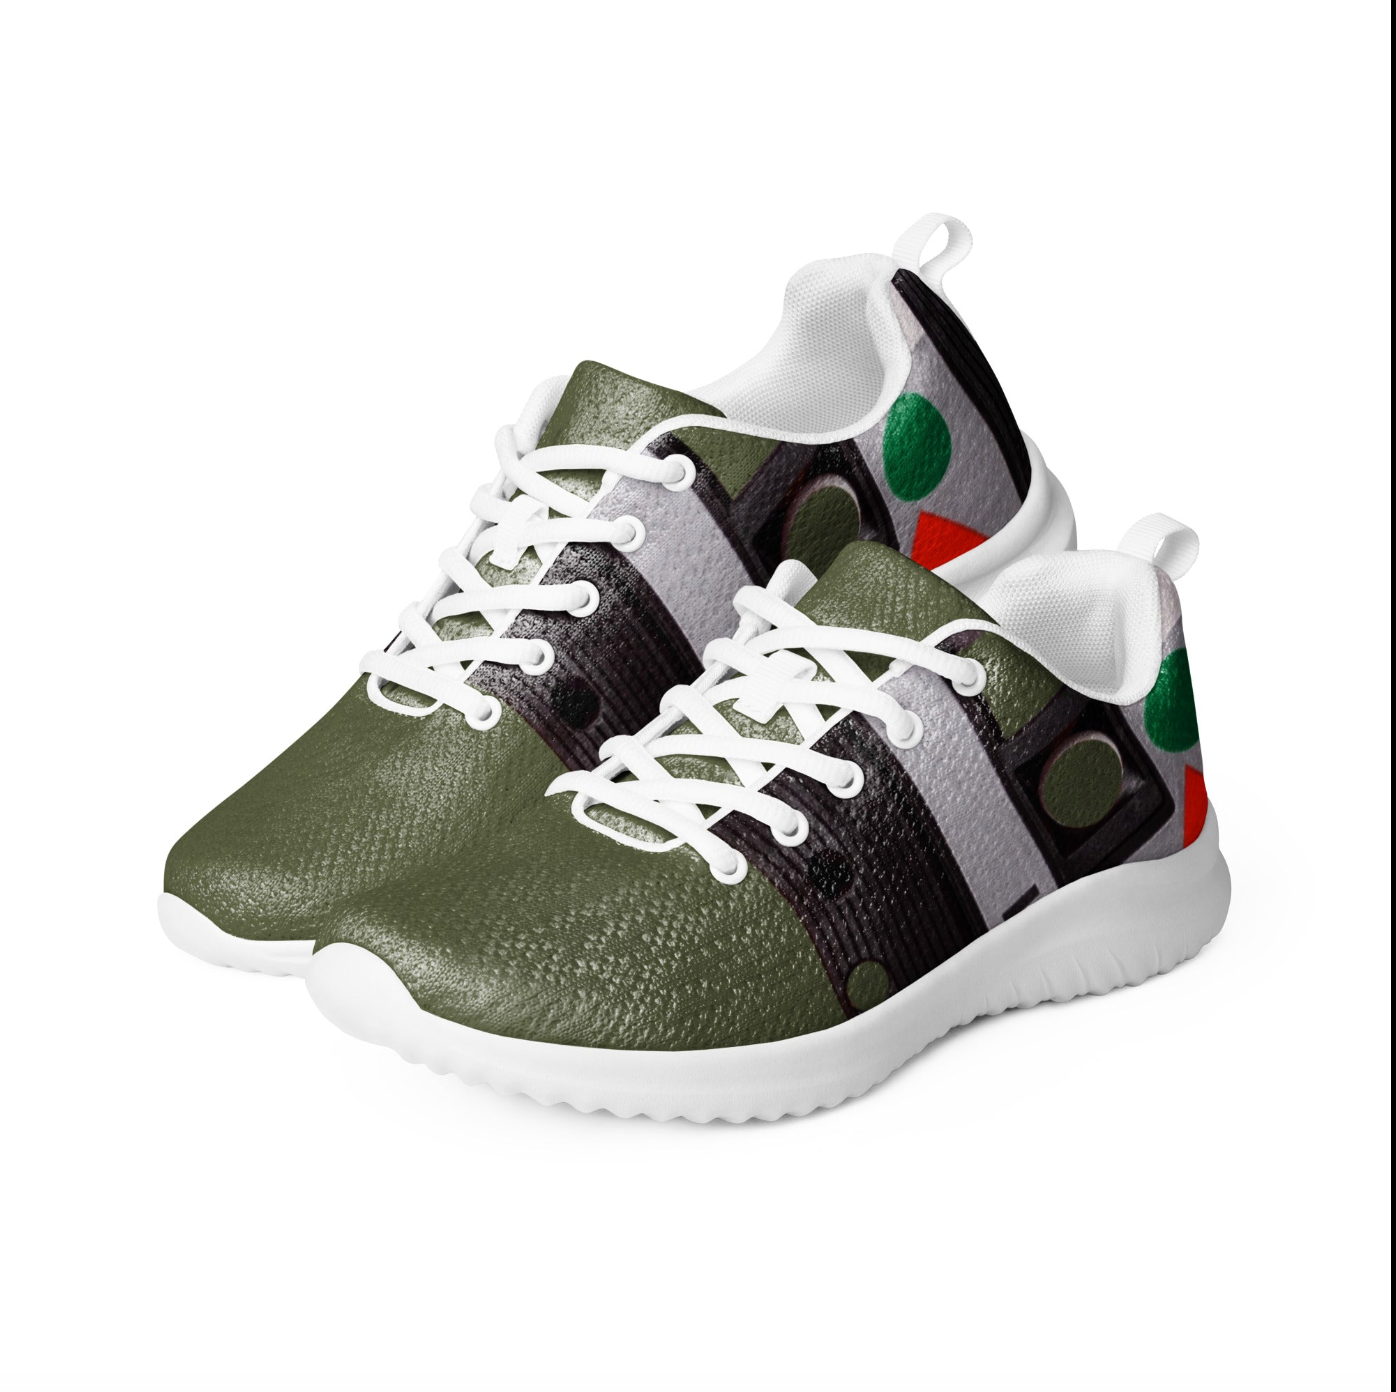 Street Style Sneakers for Men and Unisex - Dark Green